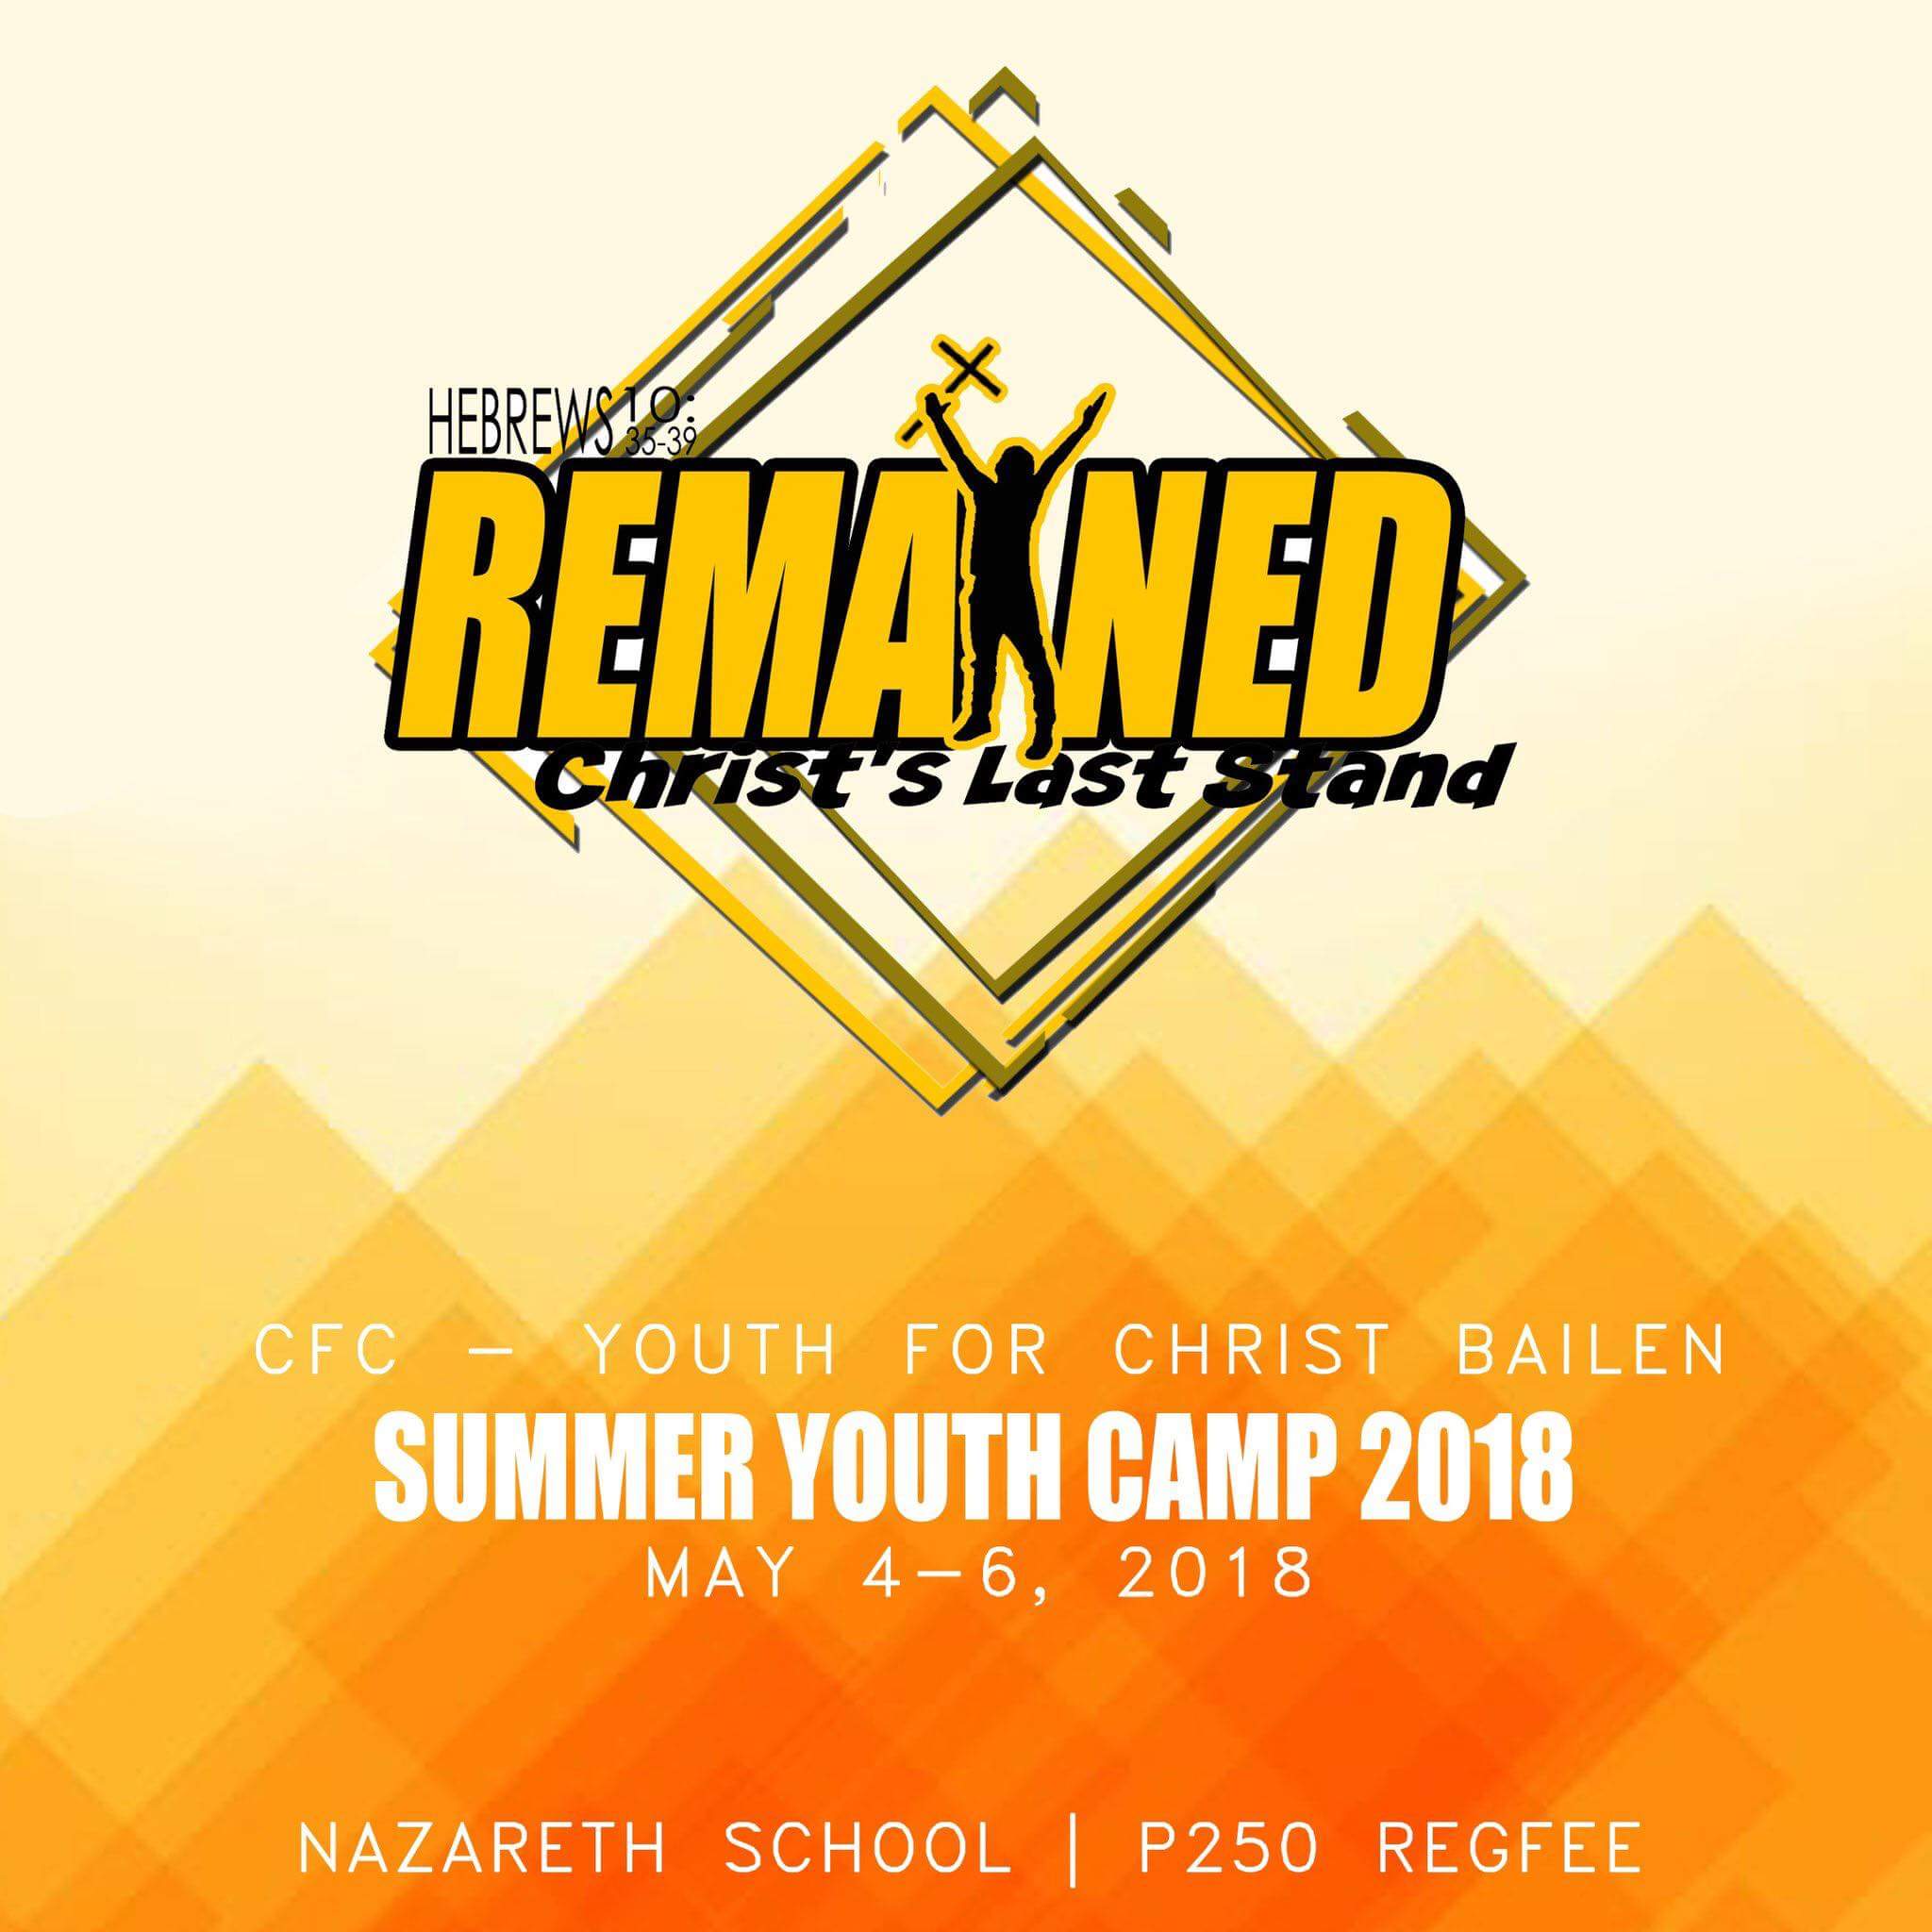 Miss Jo Calling All Youth S Of Bailen Summer Youth Camp 18 May 4 6 18 At Nazareth School Bailen Cavite Regfee Php 250 For More Info Just Contact Liz Ianna